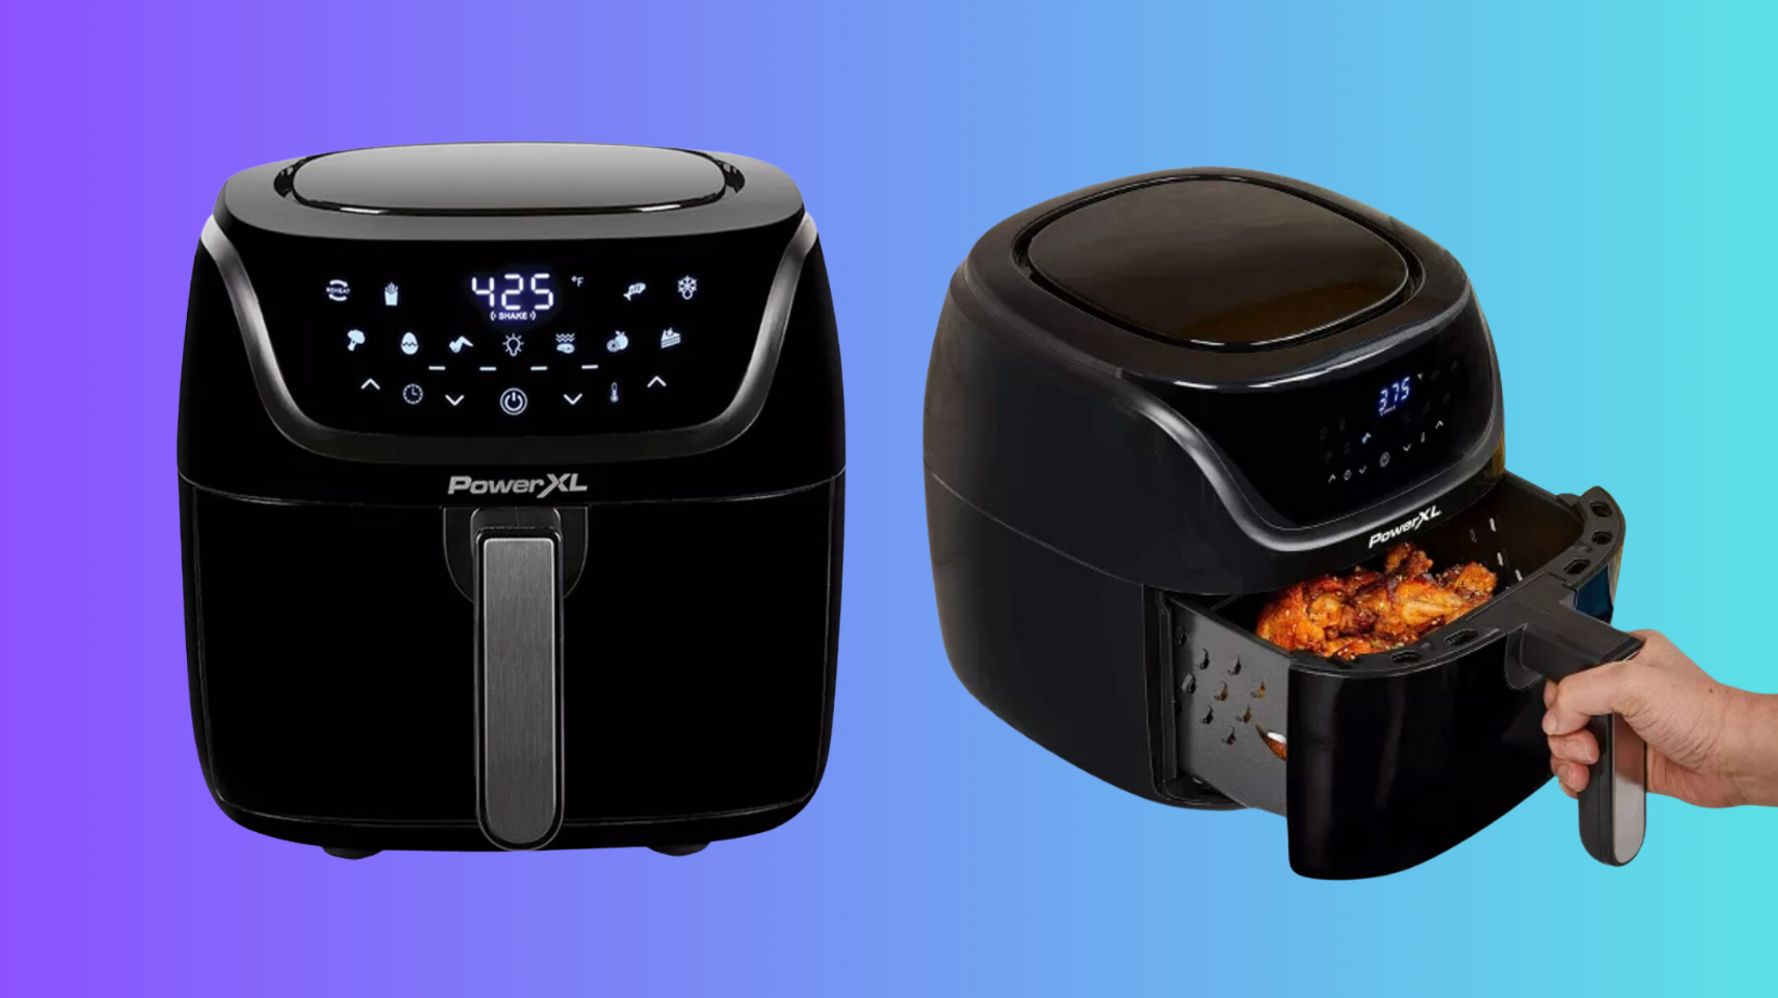 PowerXL Self-Cleaning Air Fryer Oven Reviews - Too Good to be True?